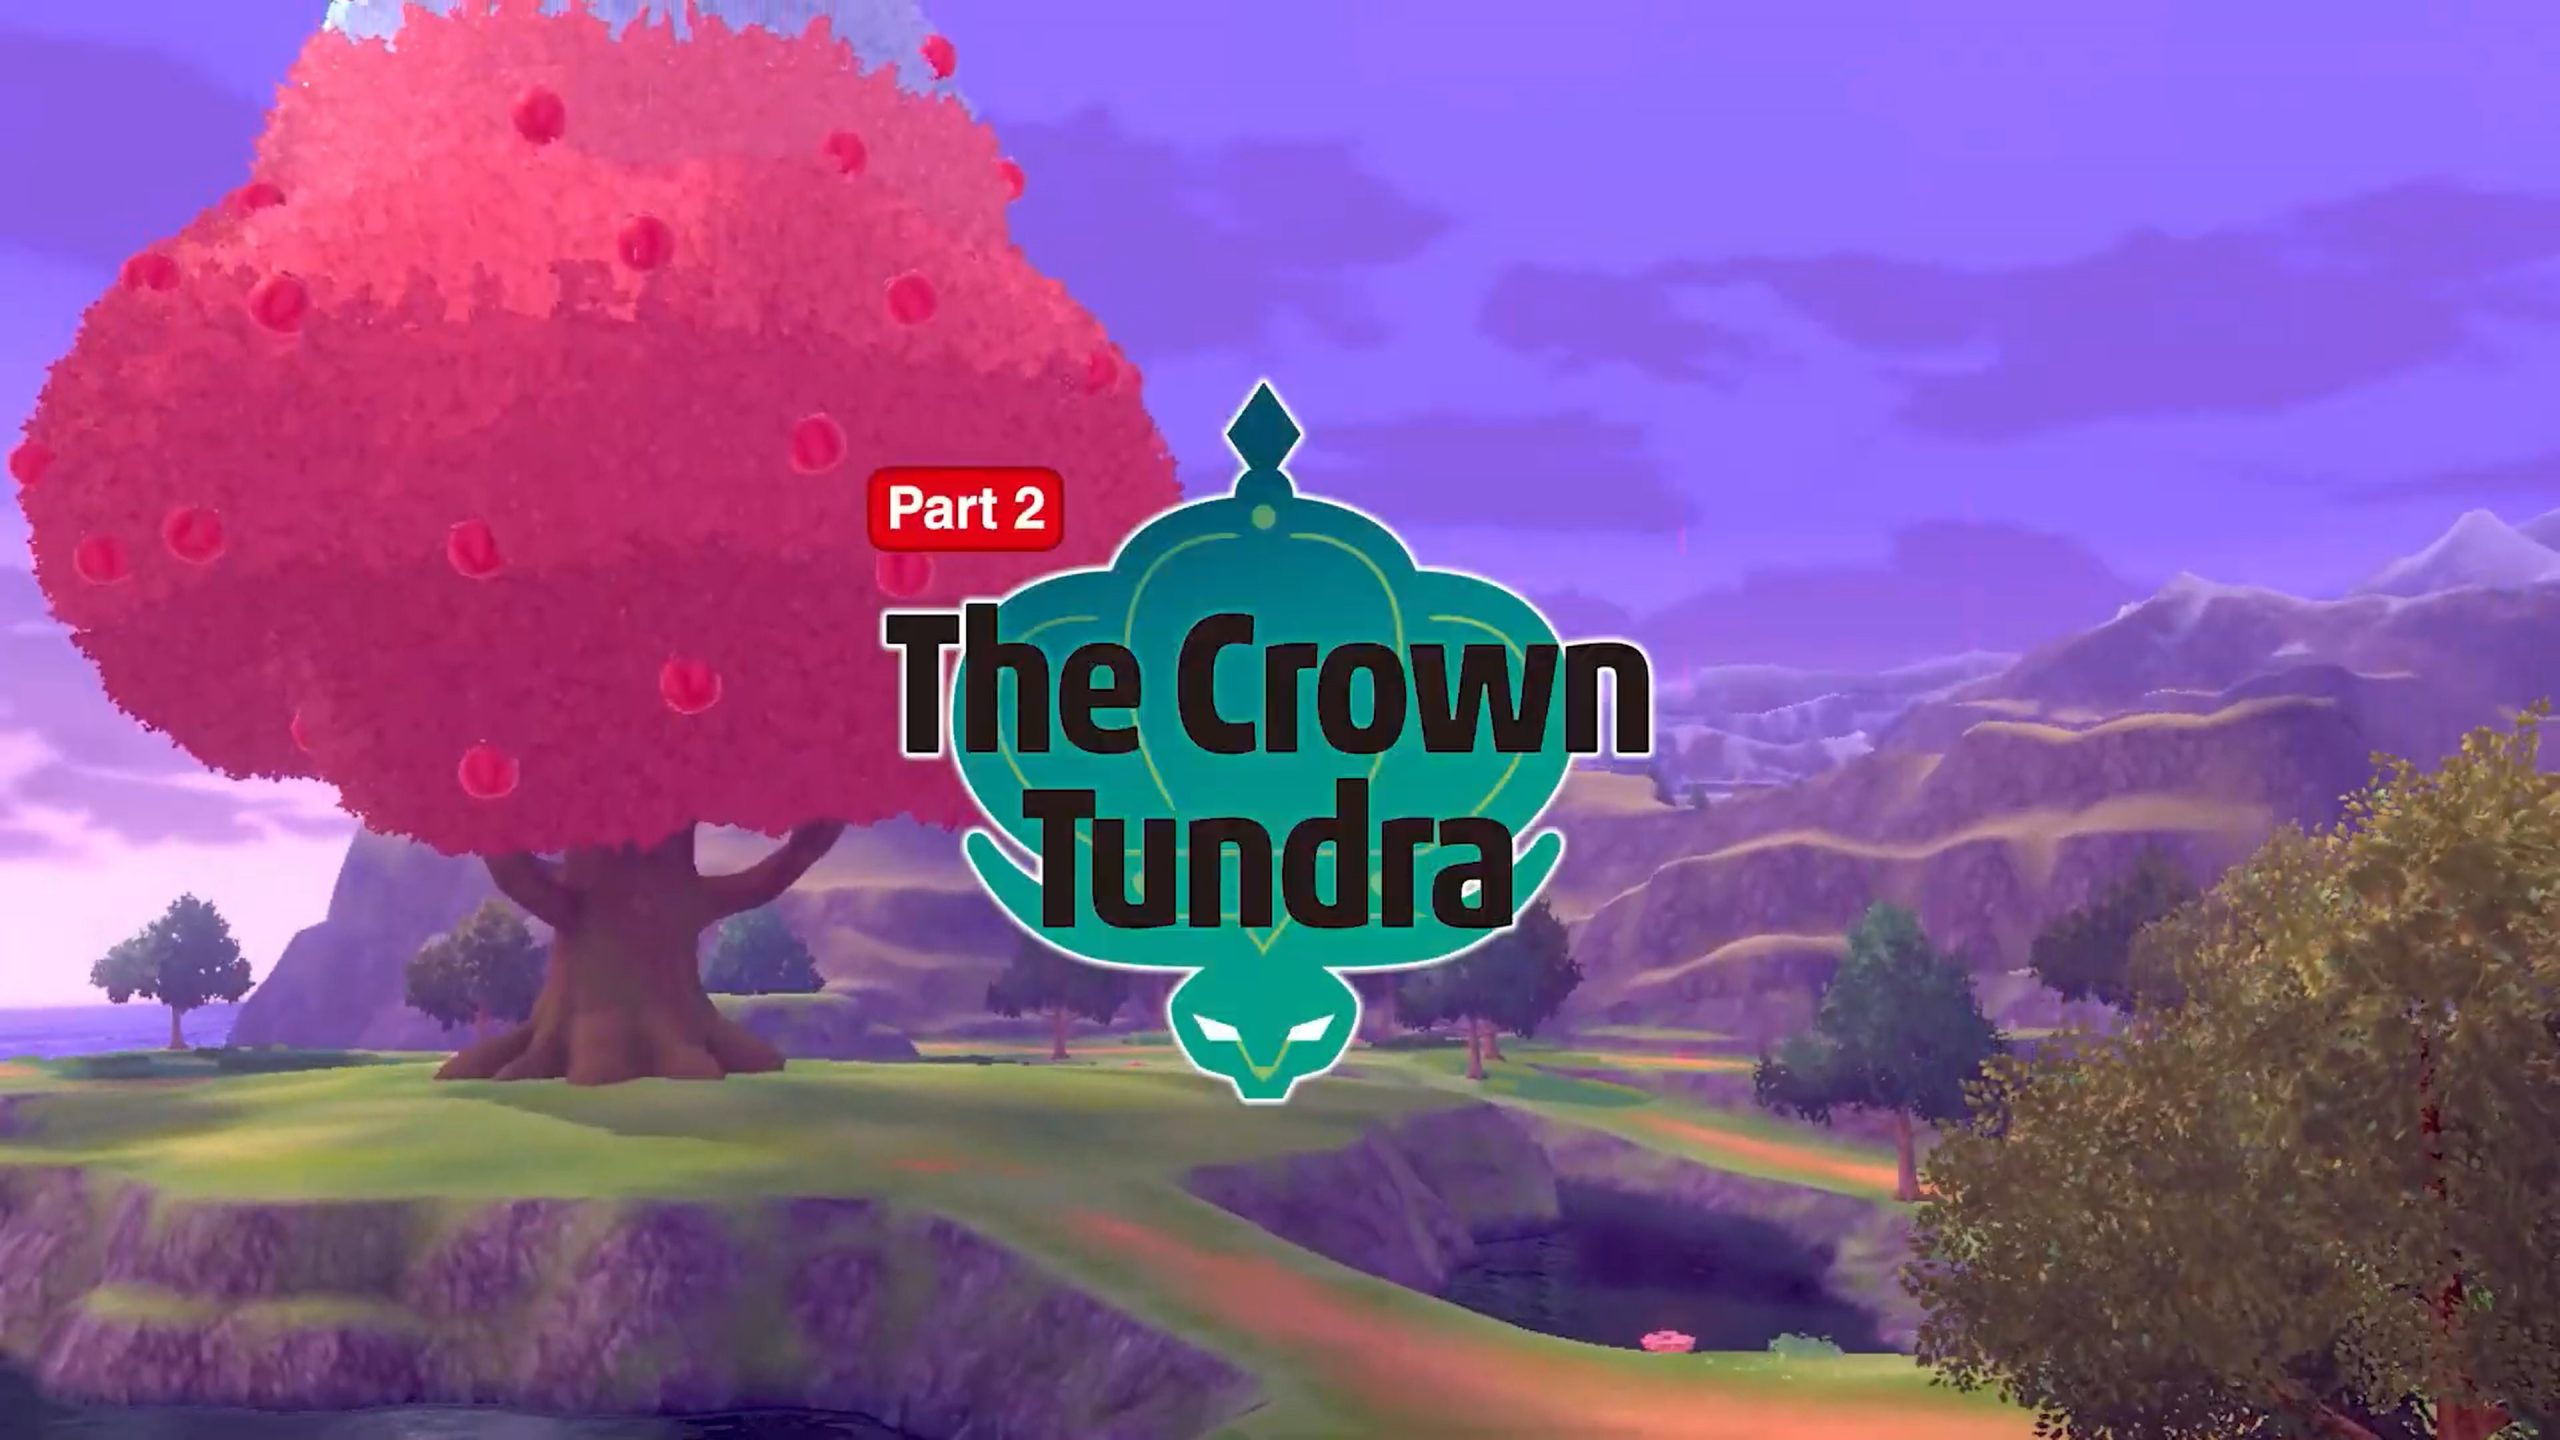 How to start Pokémon Sword and Shield's Crown Tundra expansion